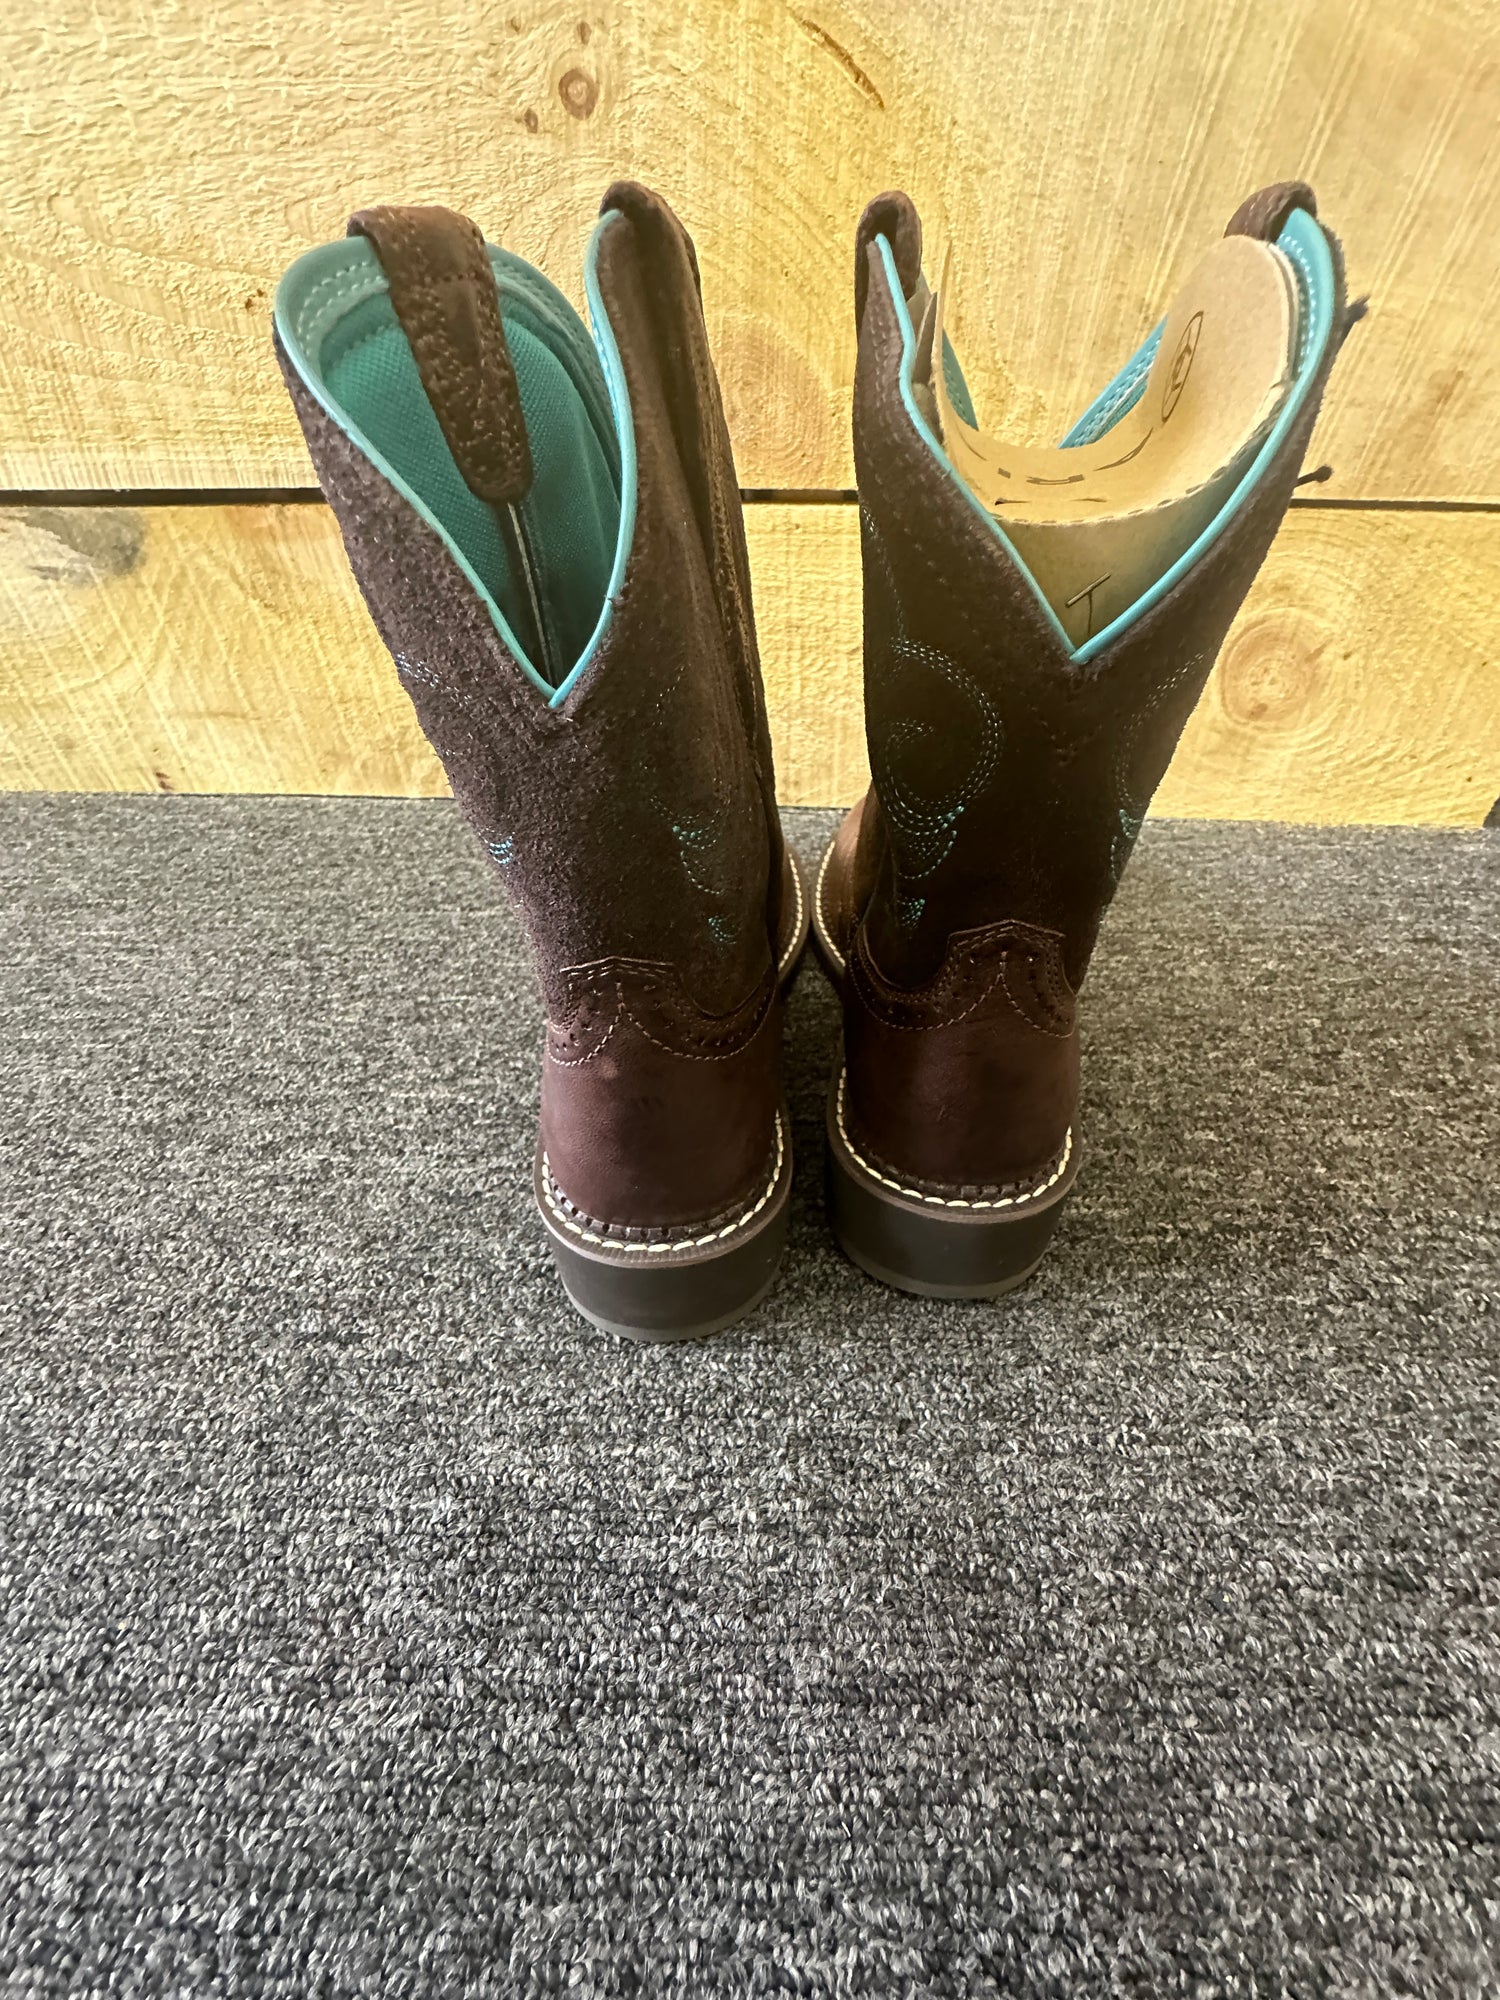 Boots - Women's Ariat Western Boots - New Size 8.5